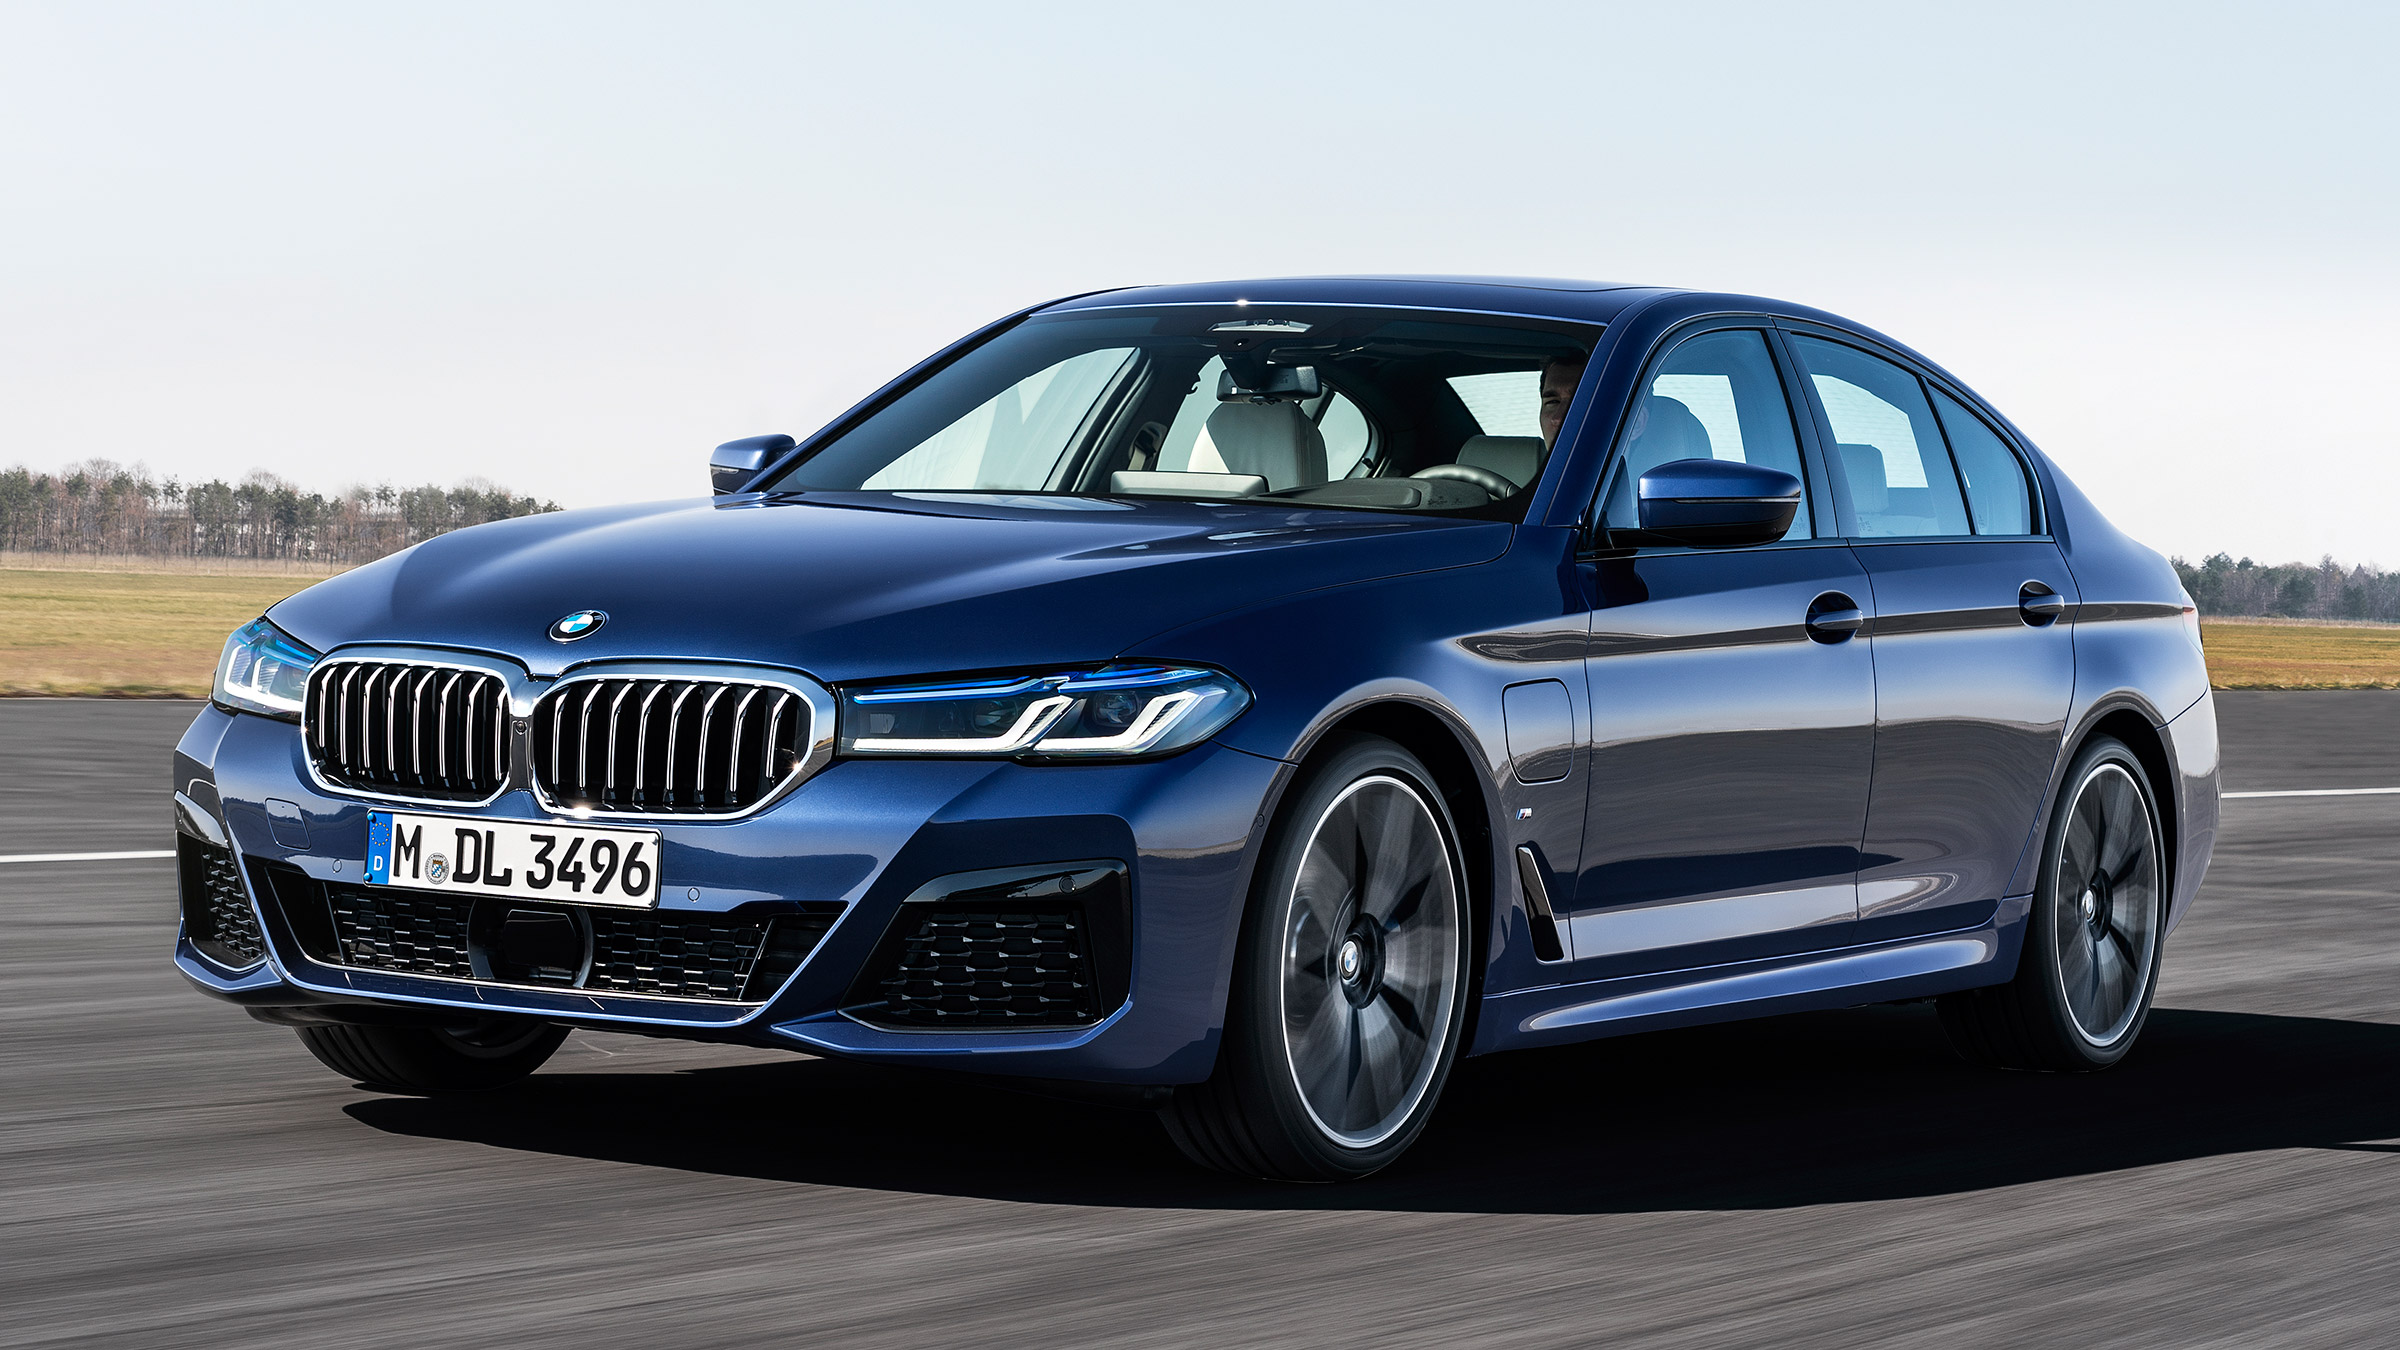 New facelifted BMW 5 Series takes aim at Audi A6 and 